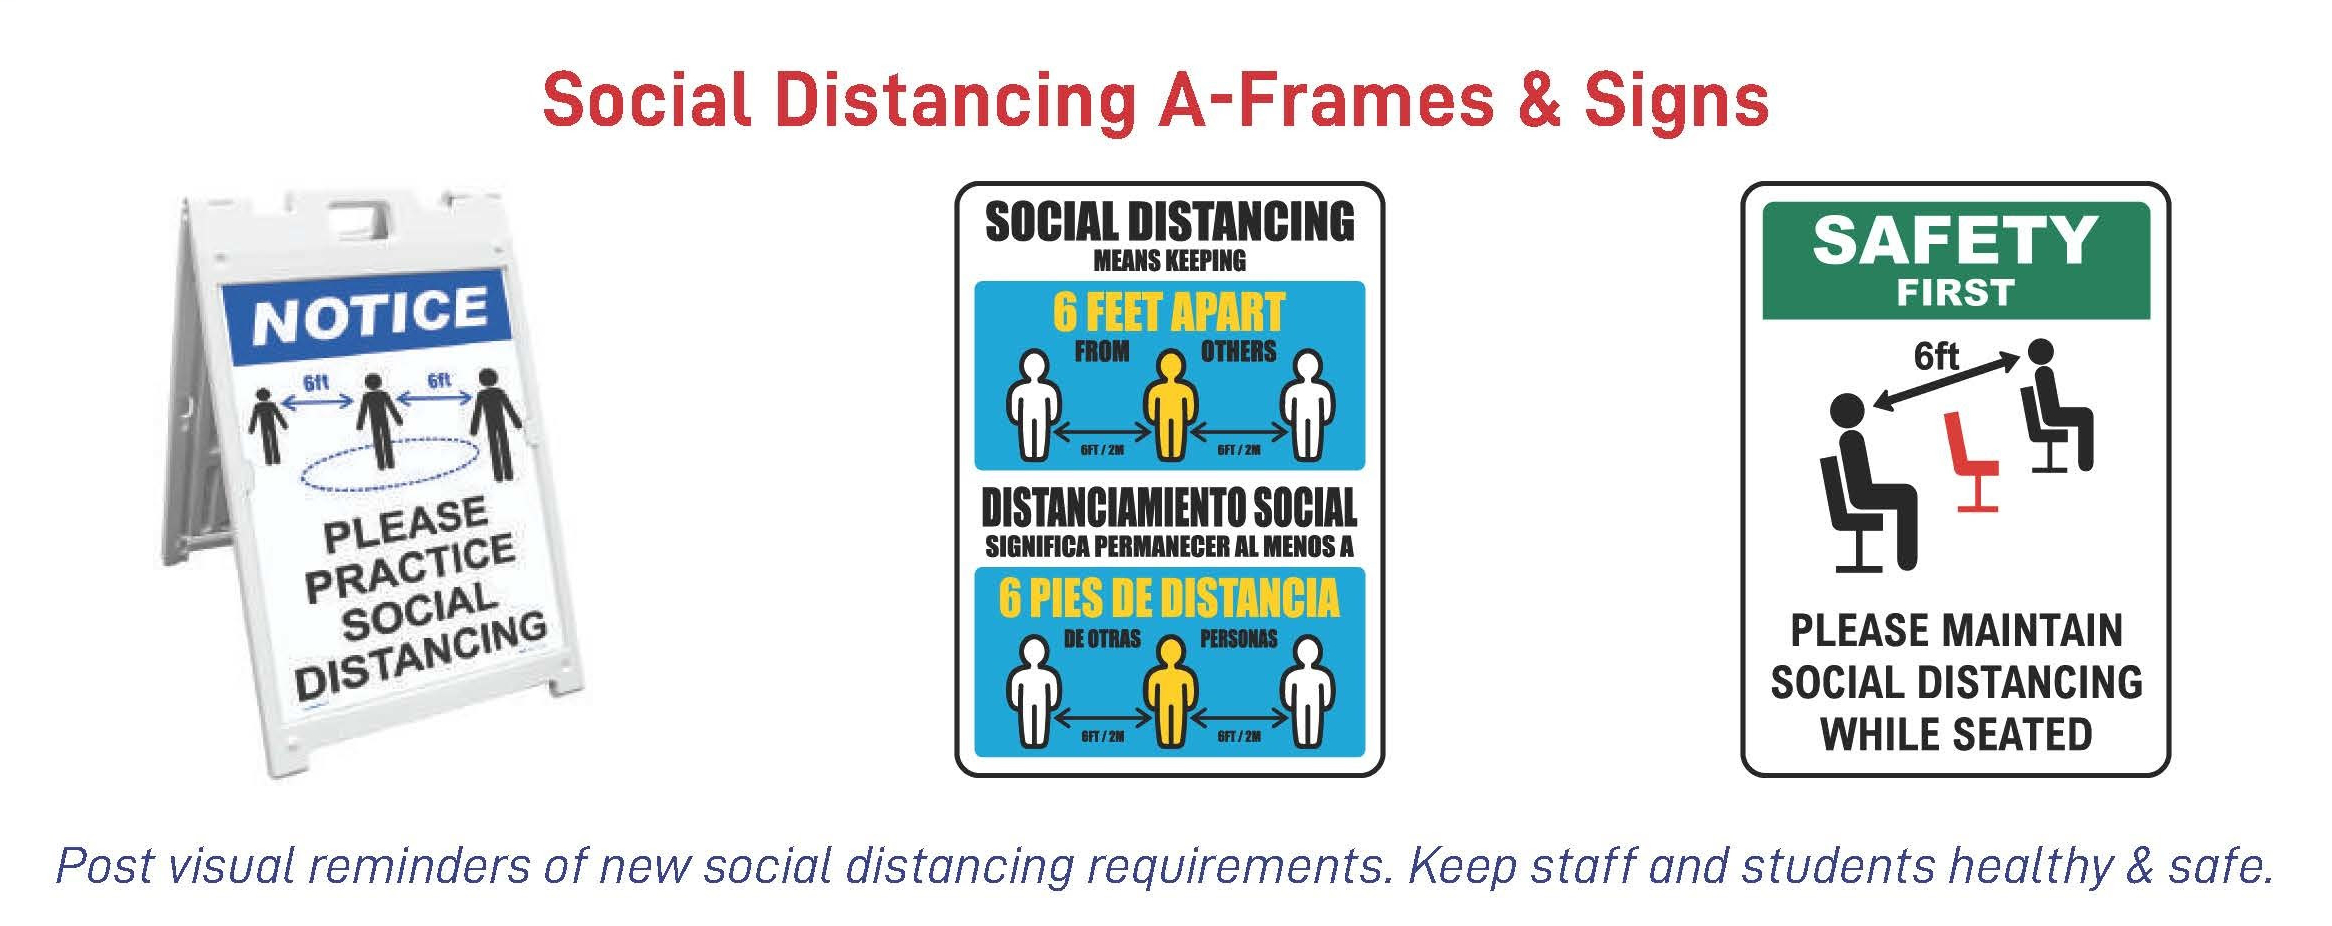 Social distancing A-frames and sign examples|Social distancing signs available from BLR